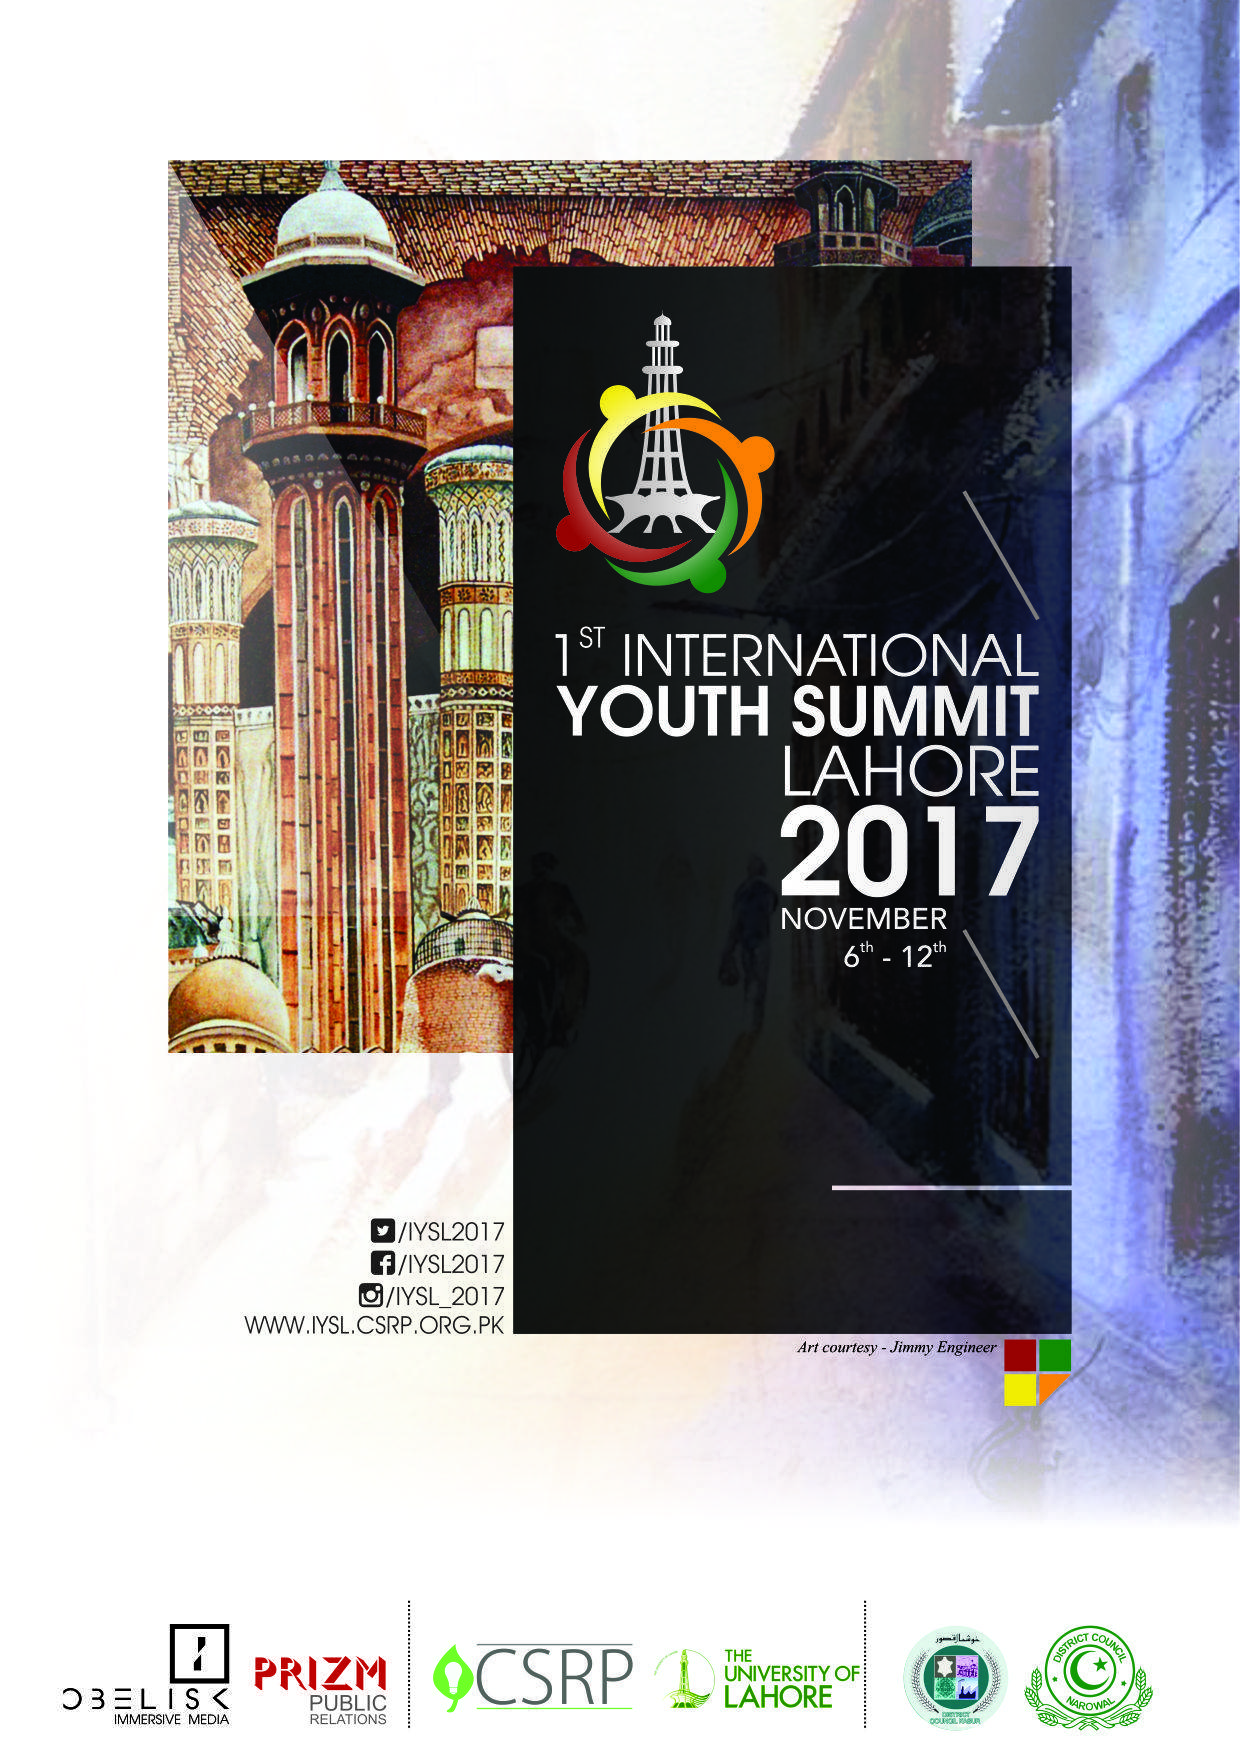 The 1st International Youth Summit 2017 to be held in Lahore by the Center of Sustainability, Research & Practice with University of Lahore